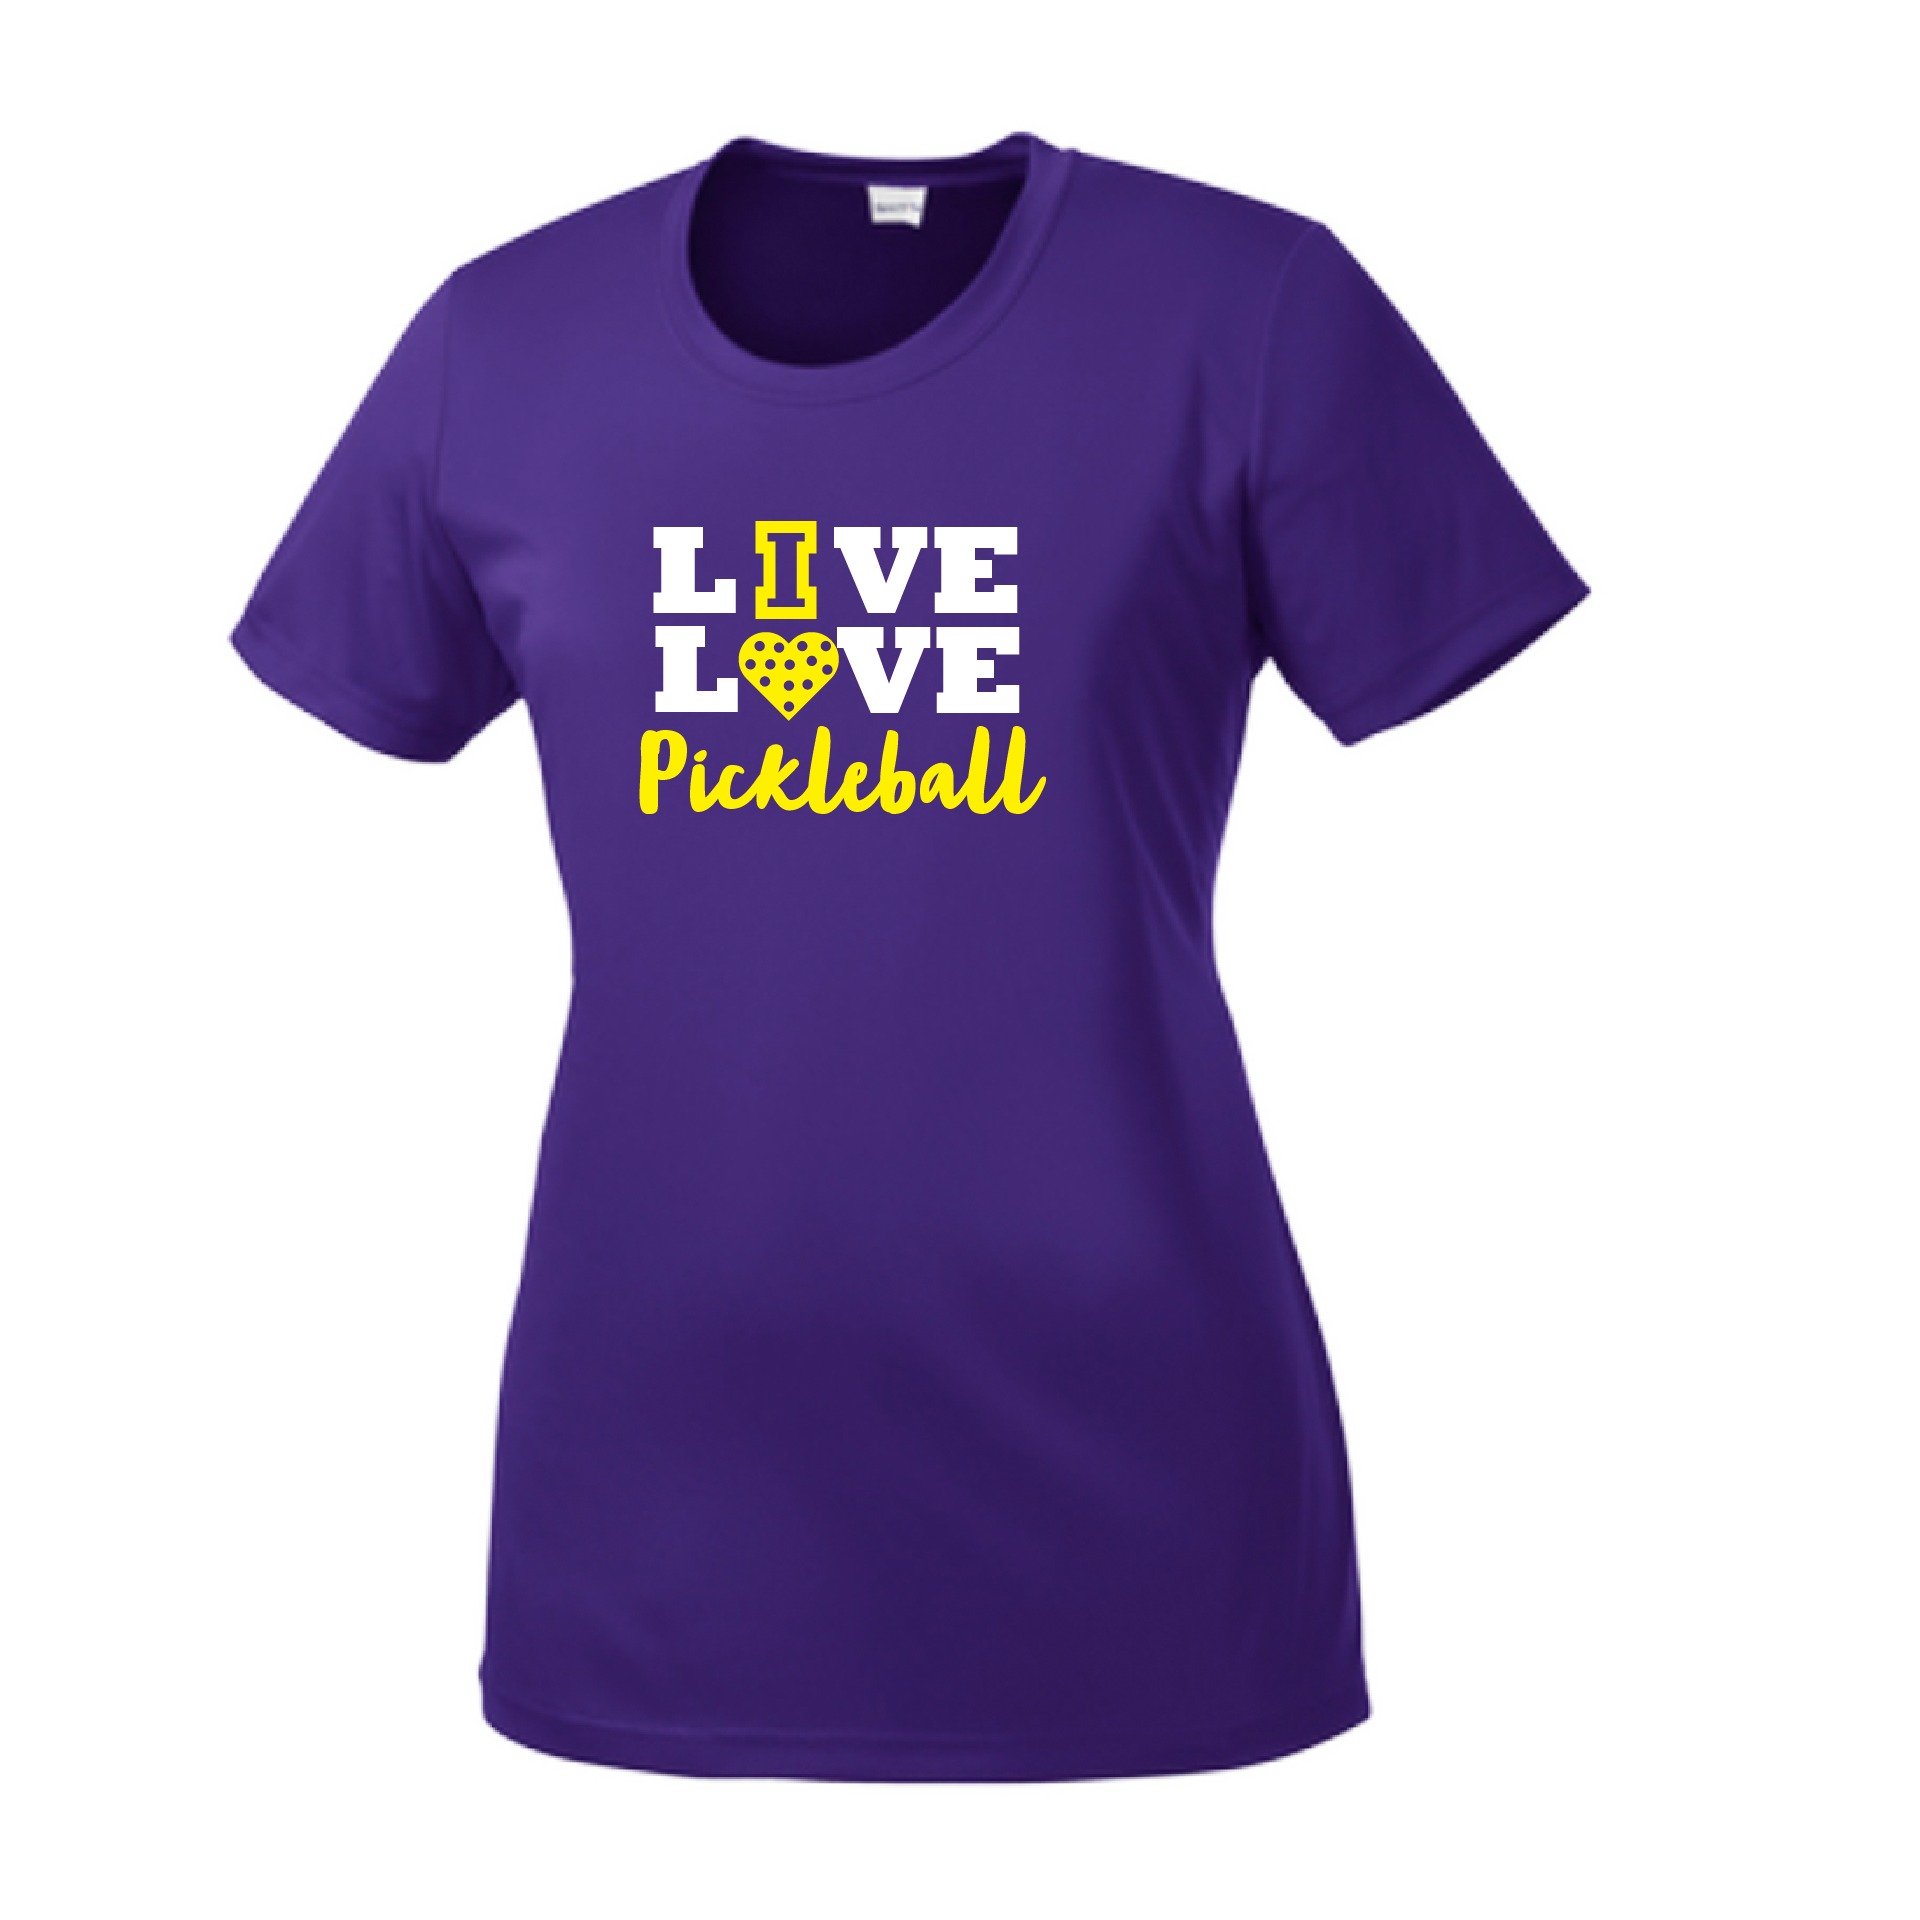 Pickleball Design: Live Love Pickleball  Women's Style: Short Sleeve Crew-Neck  Turn up the volume in this Women's shirt with its perfect mix of softness and attitude. Material is ultra-comfortable with moisture wicking properties and tri-blend softness. PosiCharge technology locks in color. Highly breathable and lightweight.